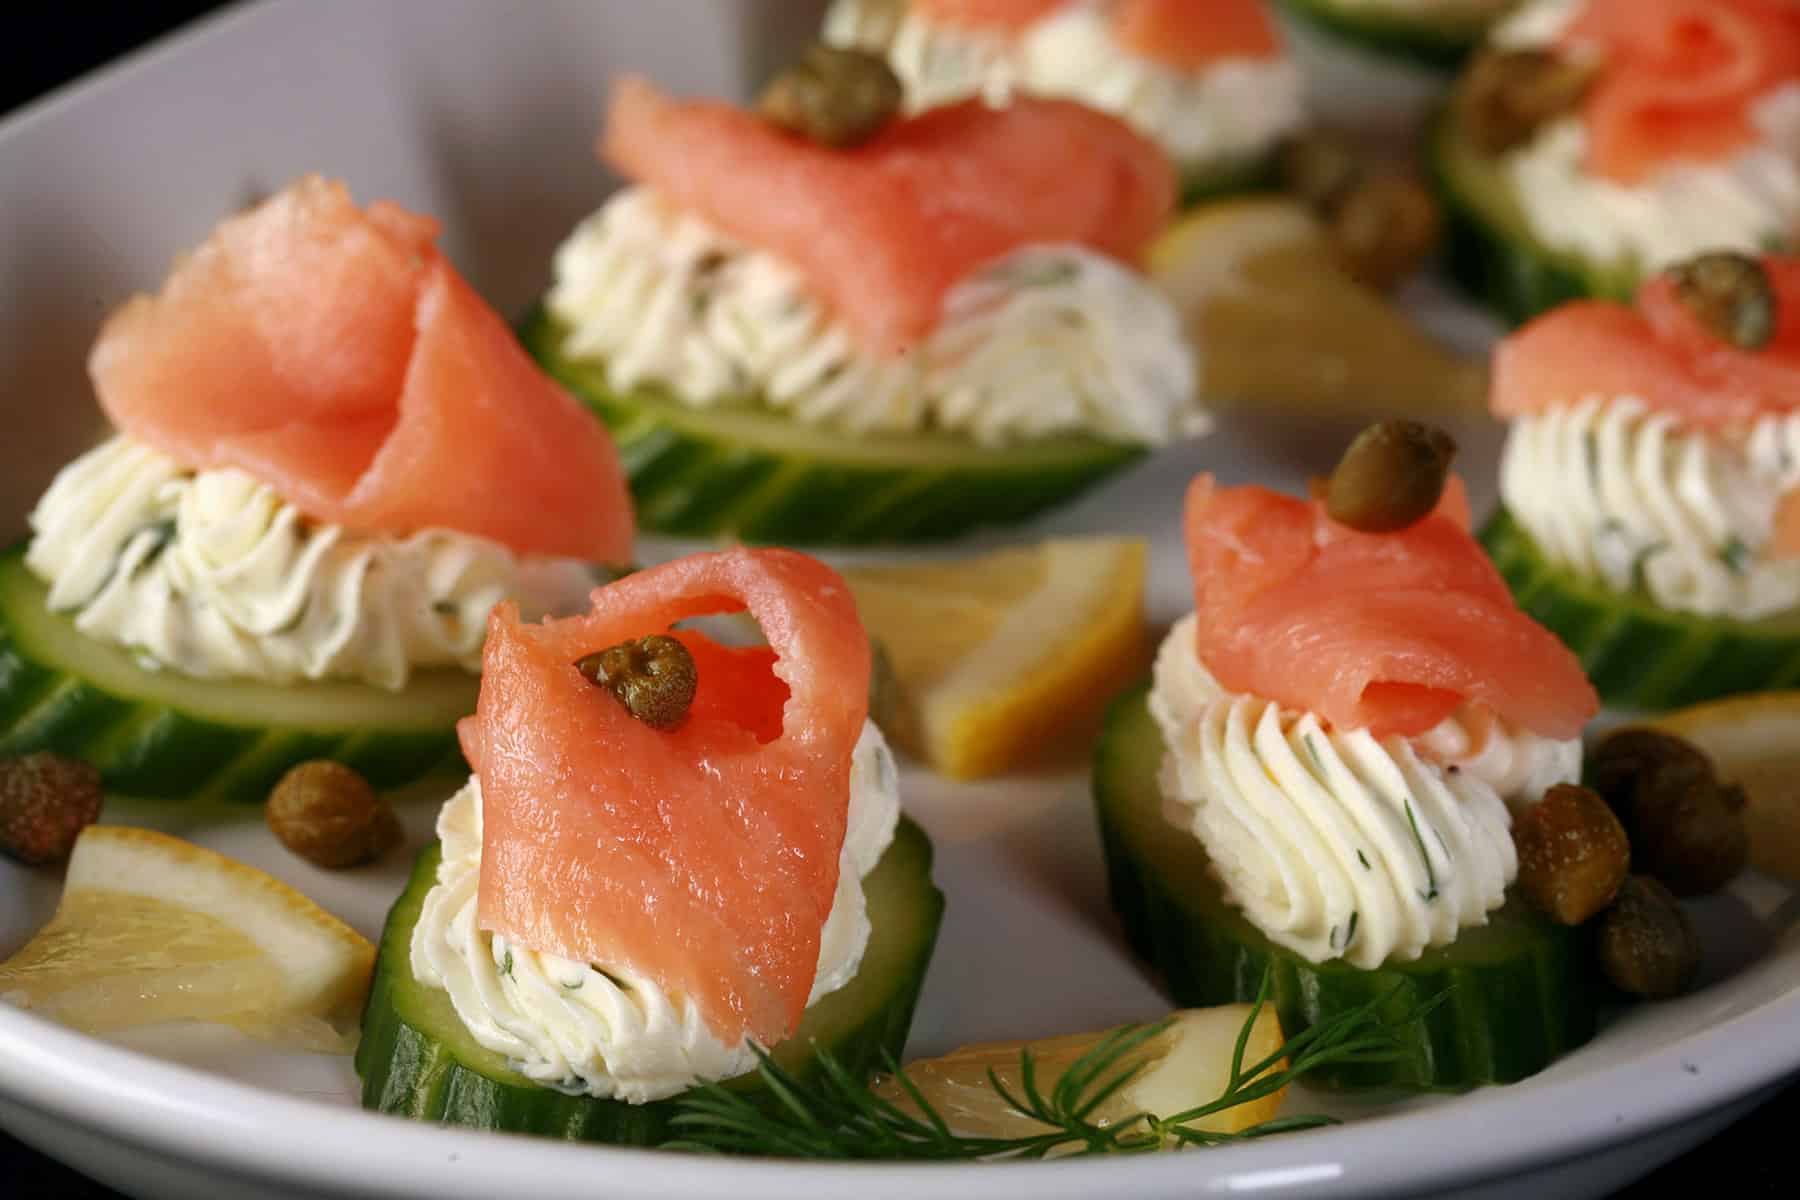 A plate of keto smoked salmon canapes with piped flavoured cream cheese on cucumber slices.